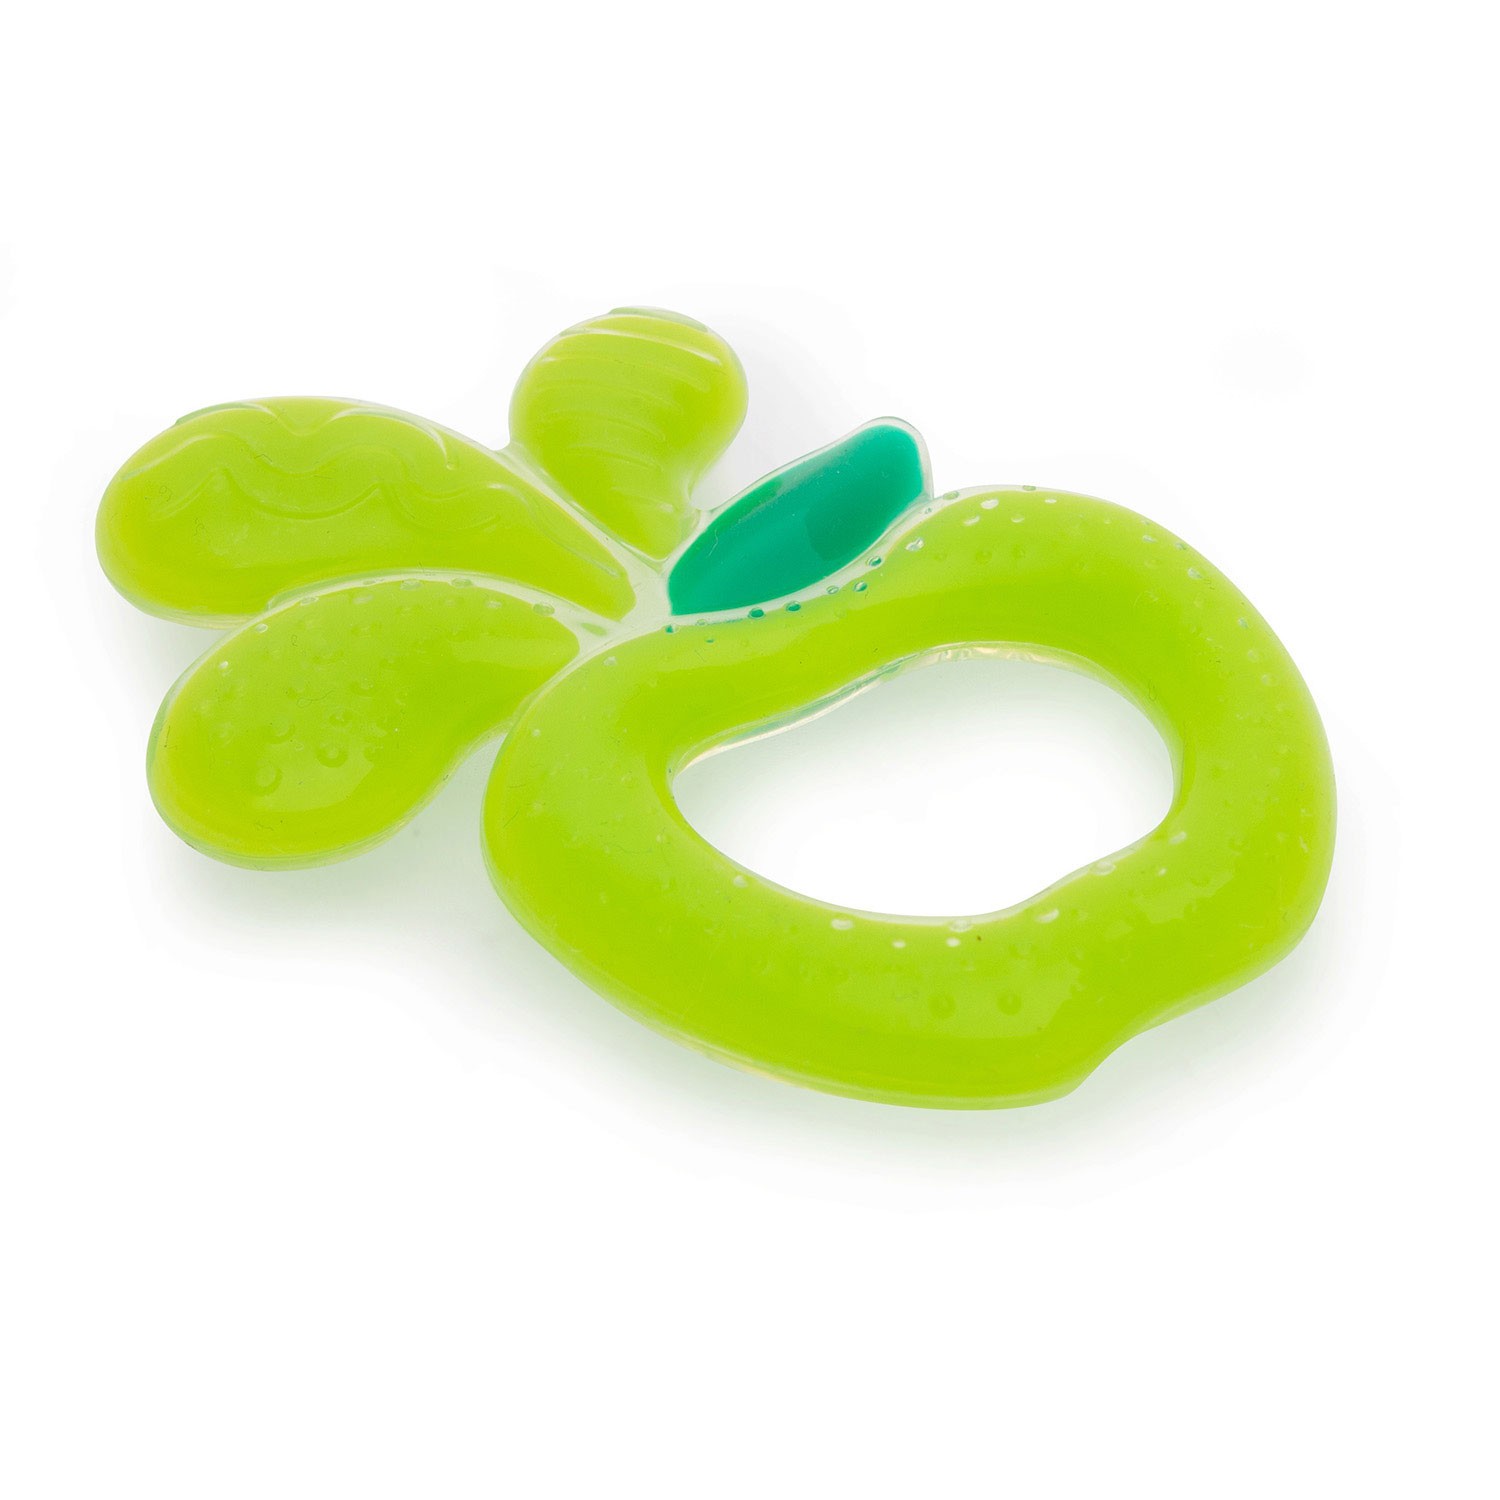 Splash Apple Teether(Not Available in the UK)